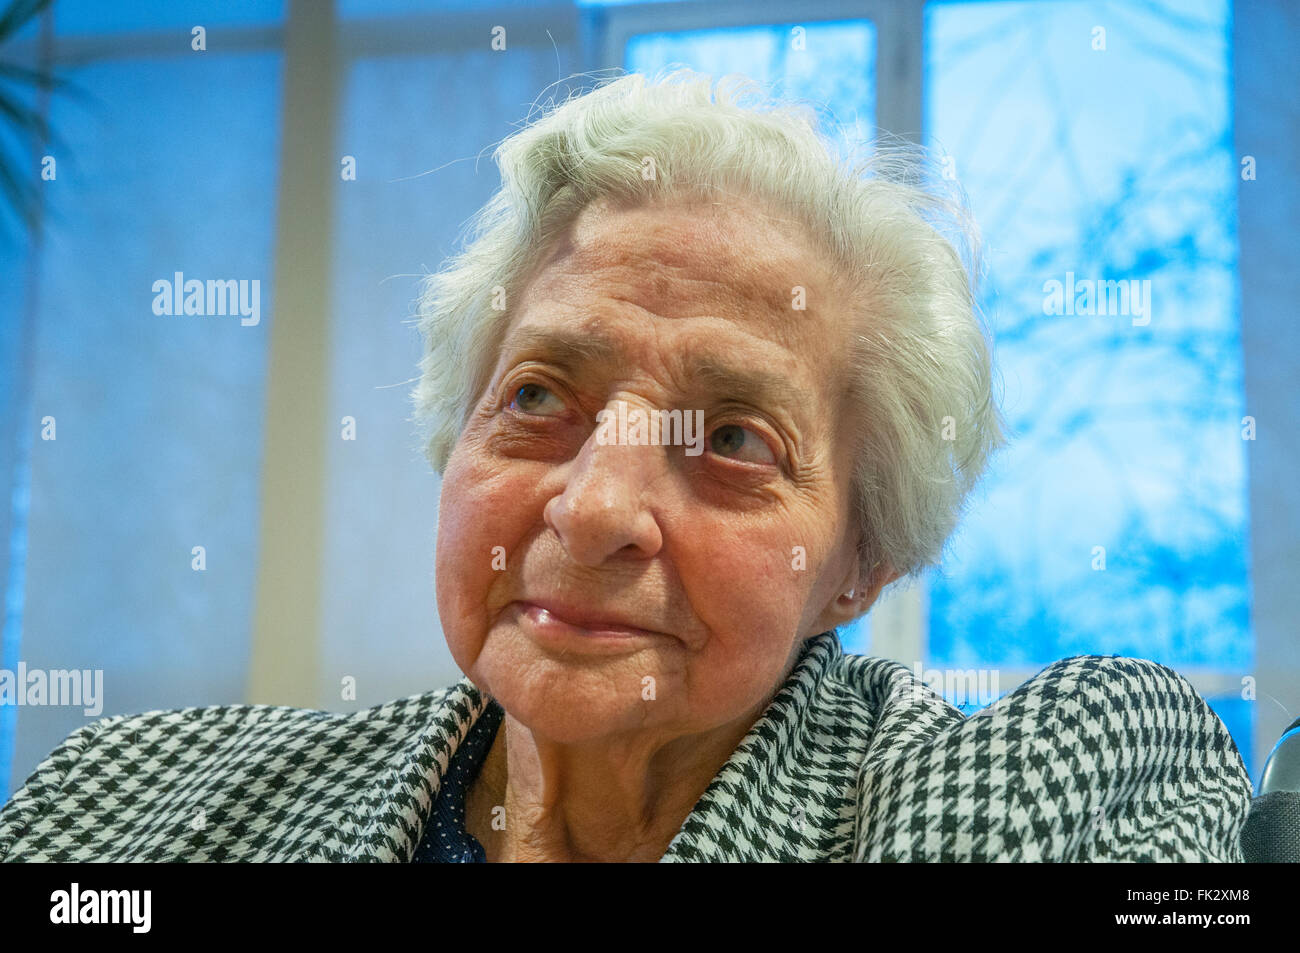 Portrait of old lady in a nursing home, looking up. Stock Photo